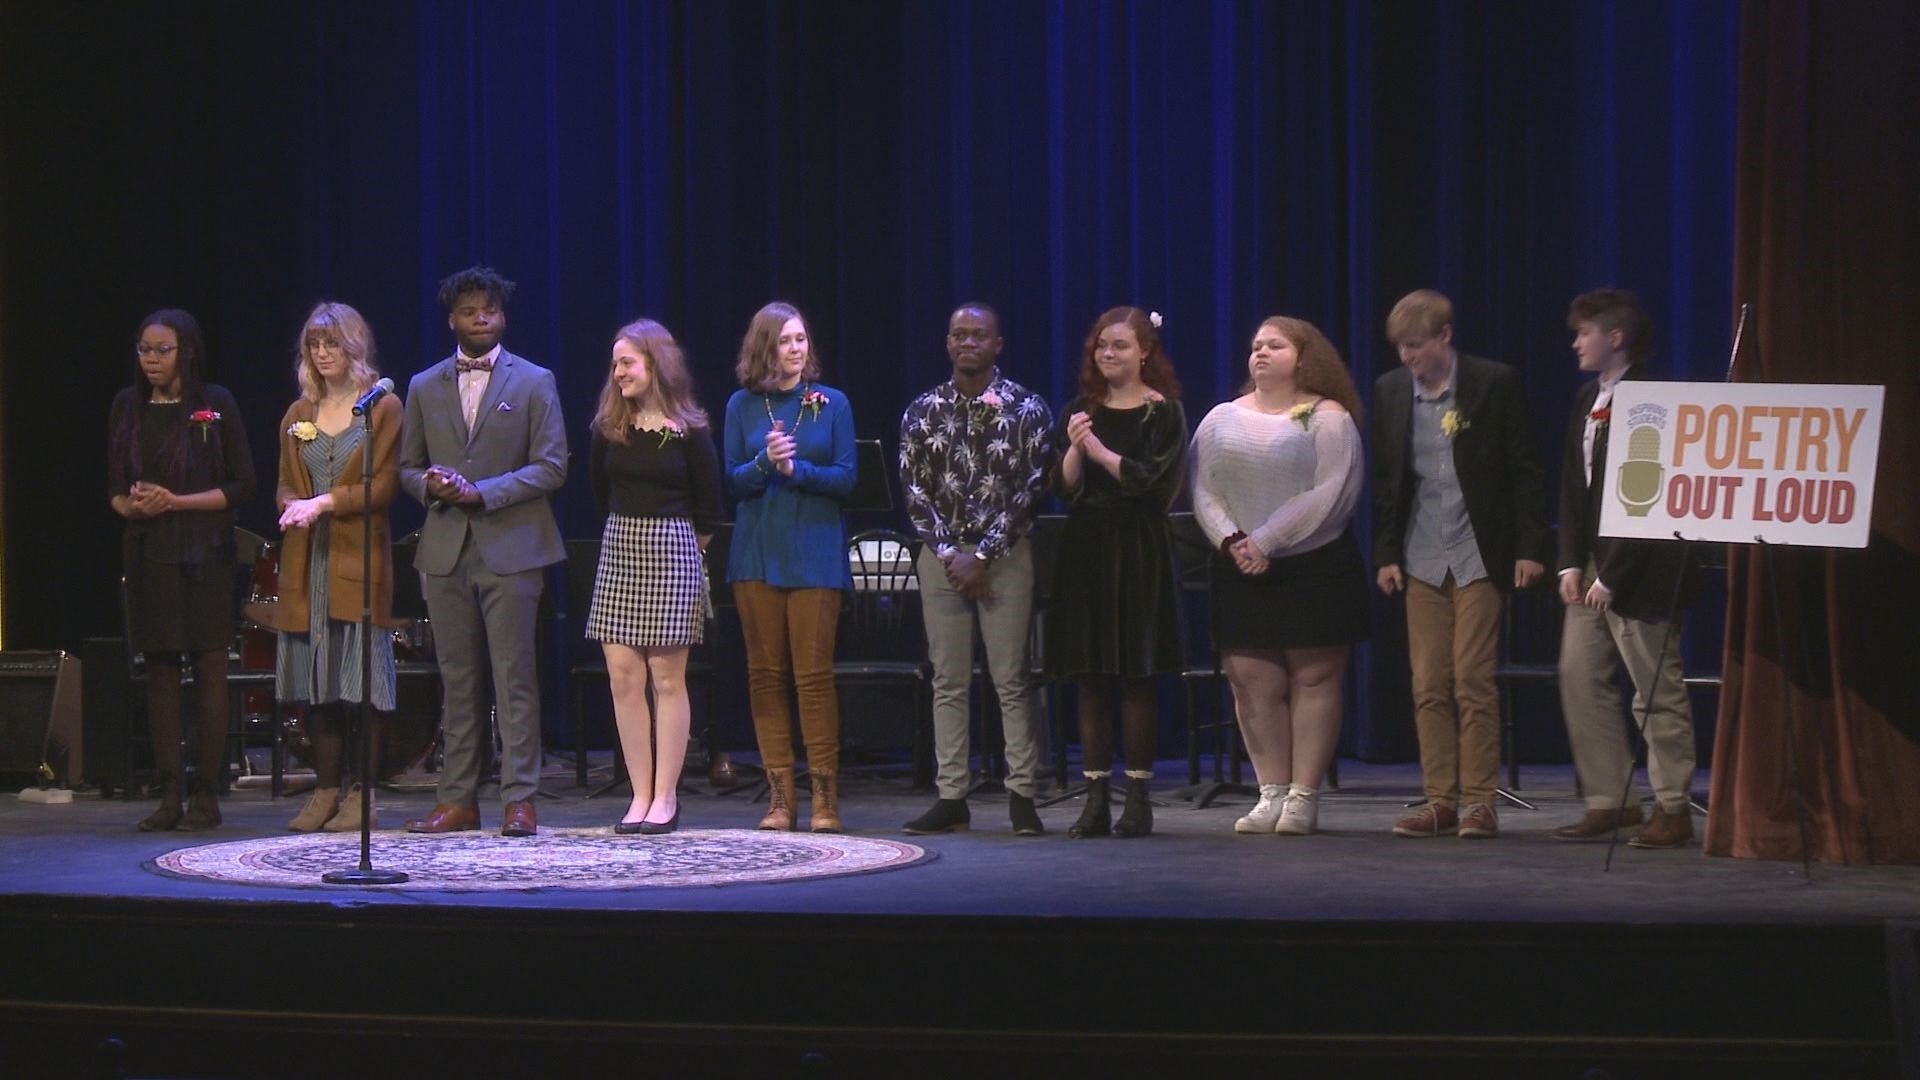 Maine's ten best reciters of poetry have come together to perform.